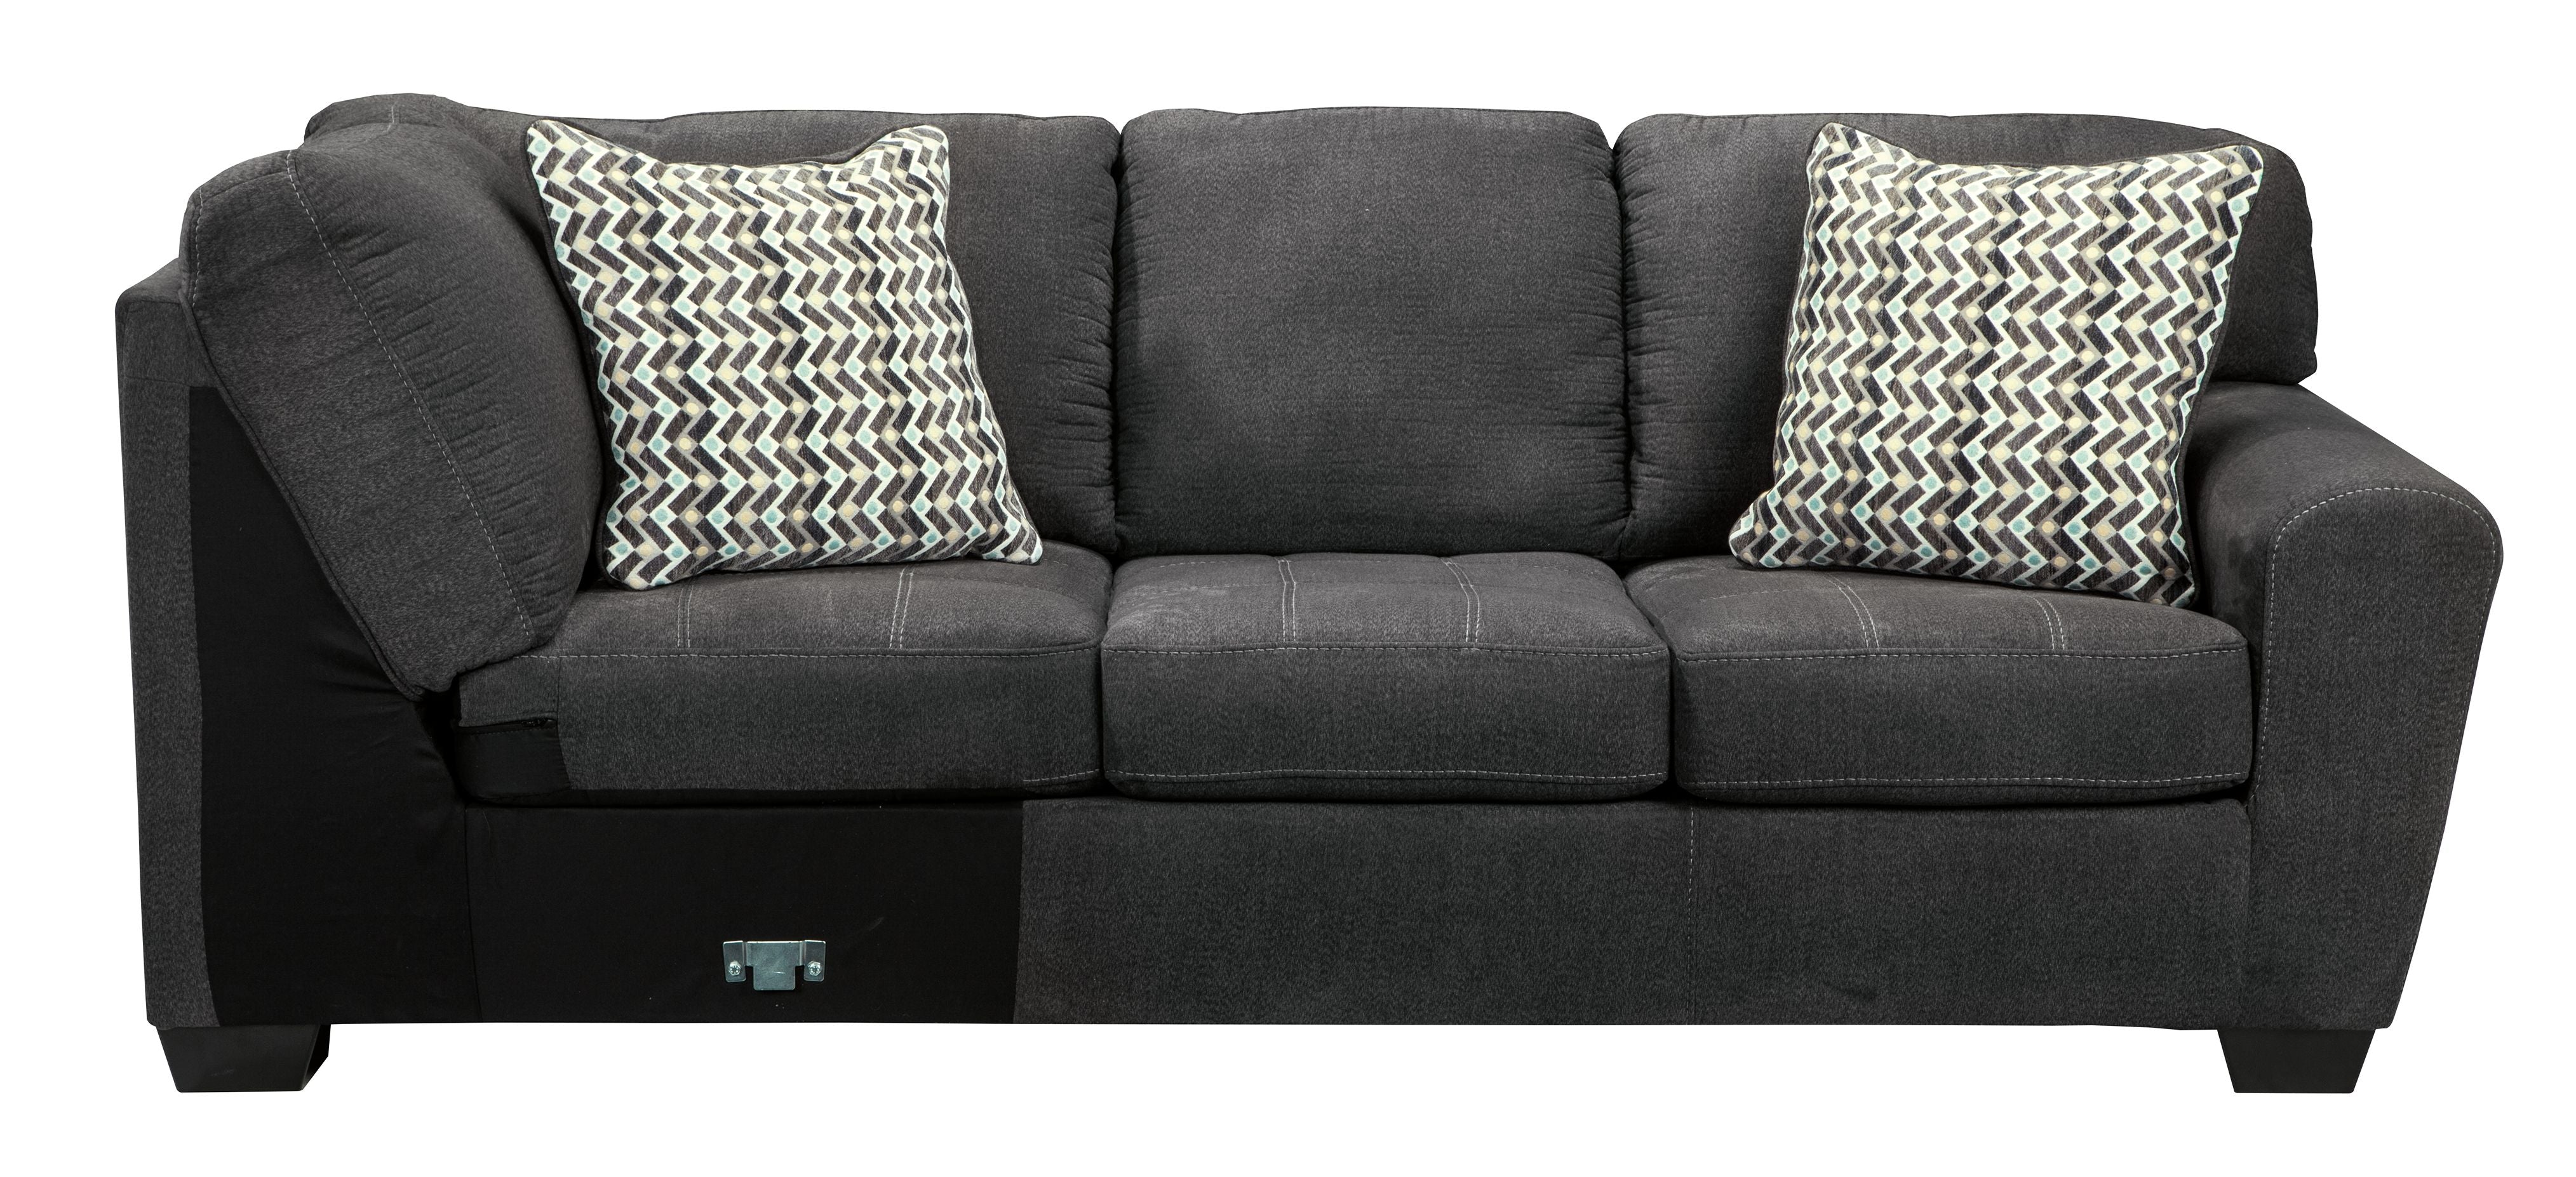 Ashley Ambee Sectional U Shaped Sectional Chaise - Gray-Stationary Sectionals-American Furniture Outlet